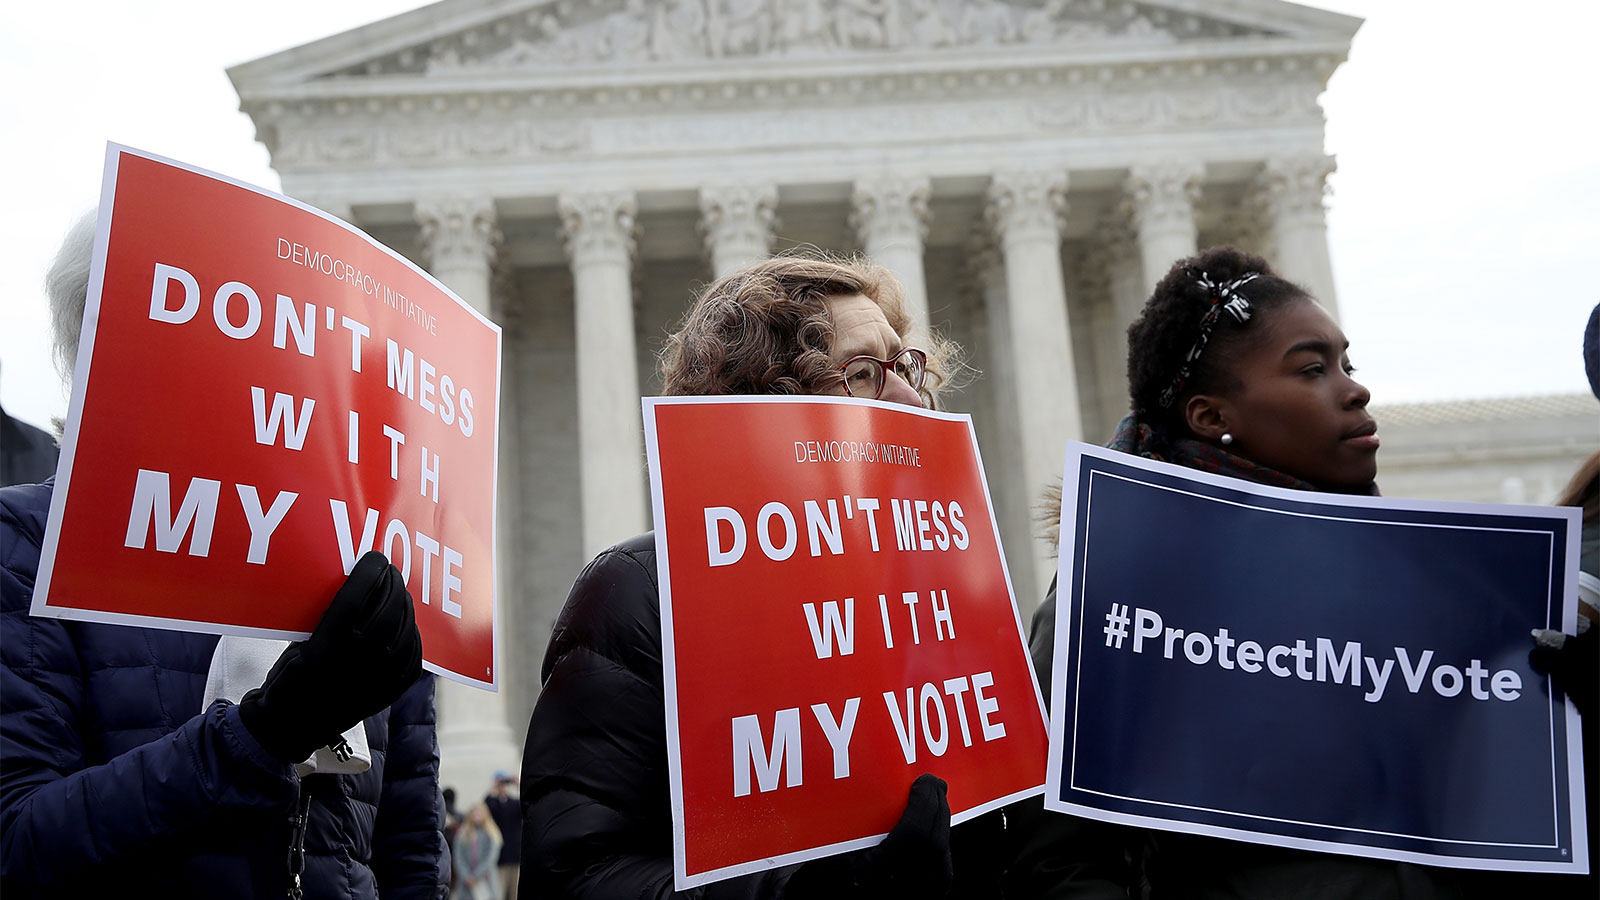 Voting rights activists protgesting in front of the U.S. Supreme Court building in Washington, DC